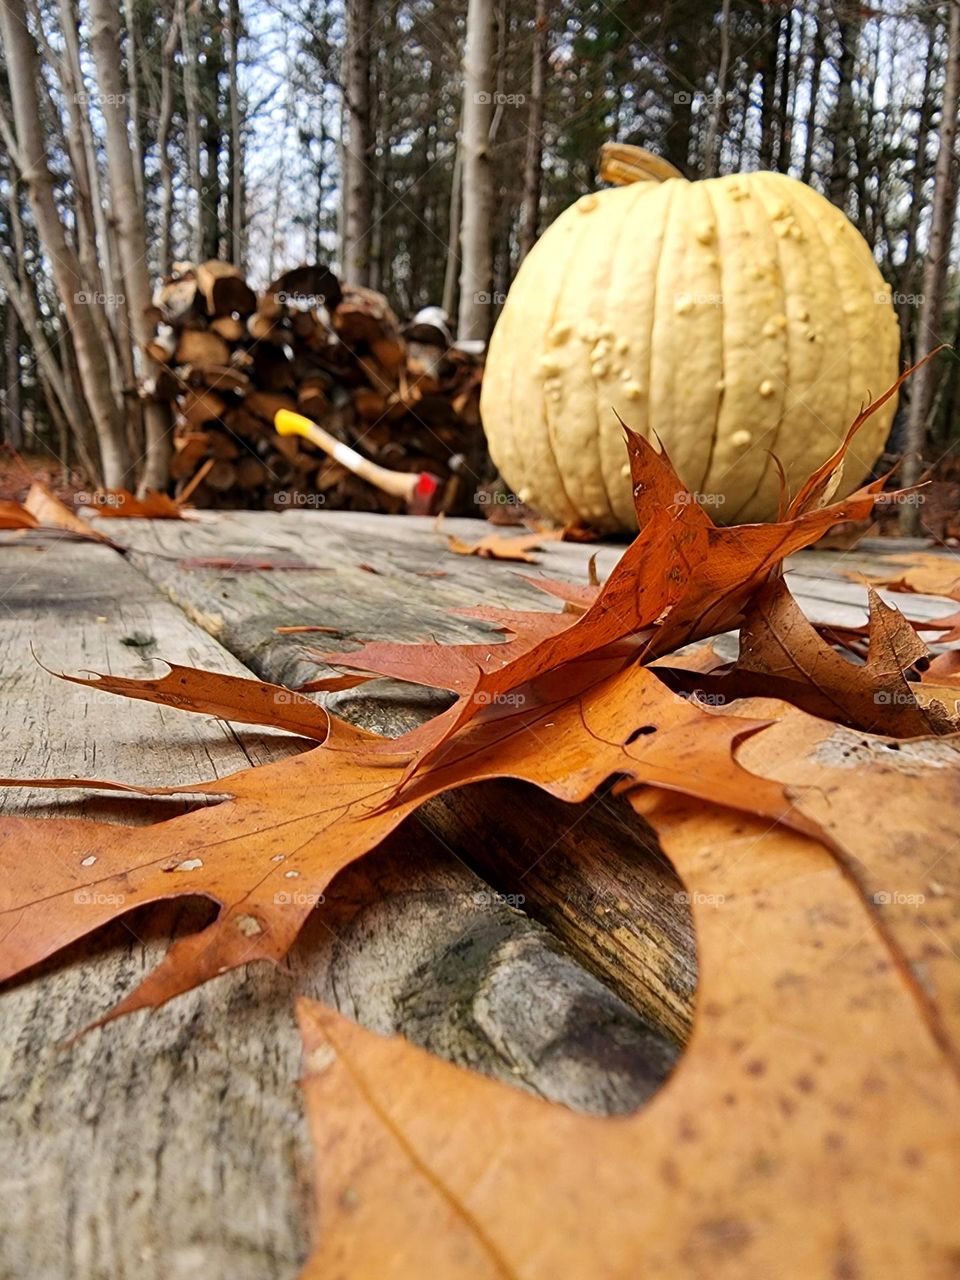 A country fall scene with fallen leaves, pumpkin, and an axe & forewood in the background.